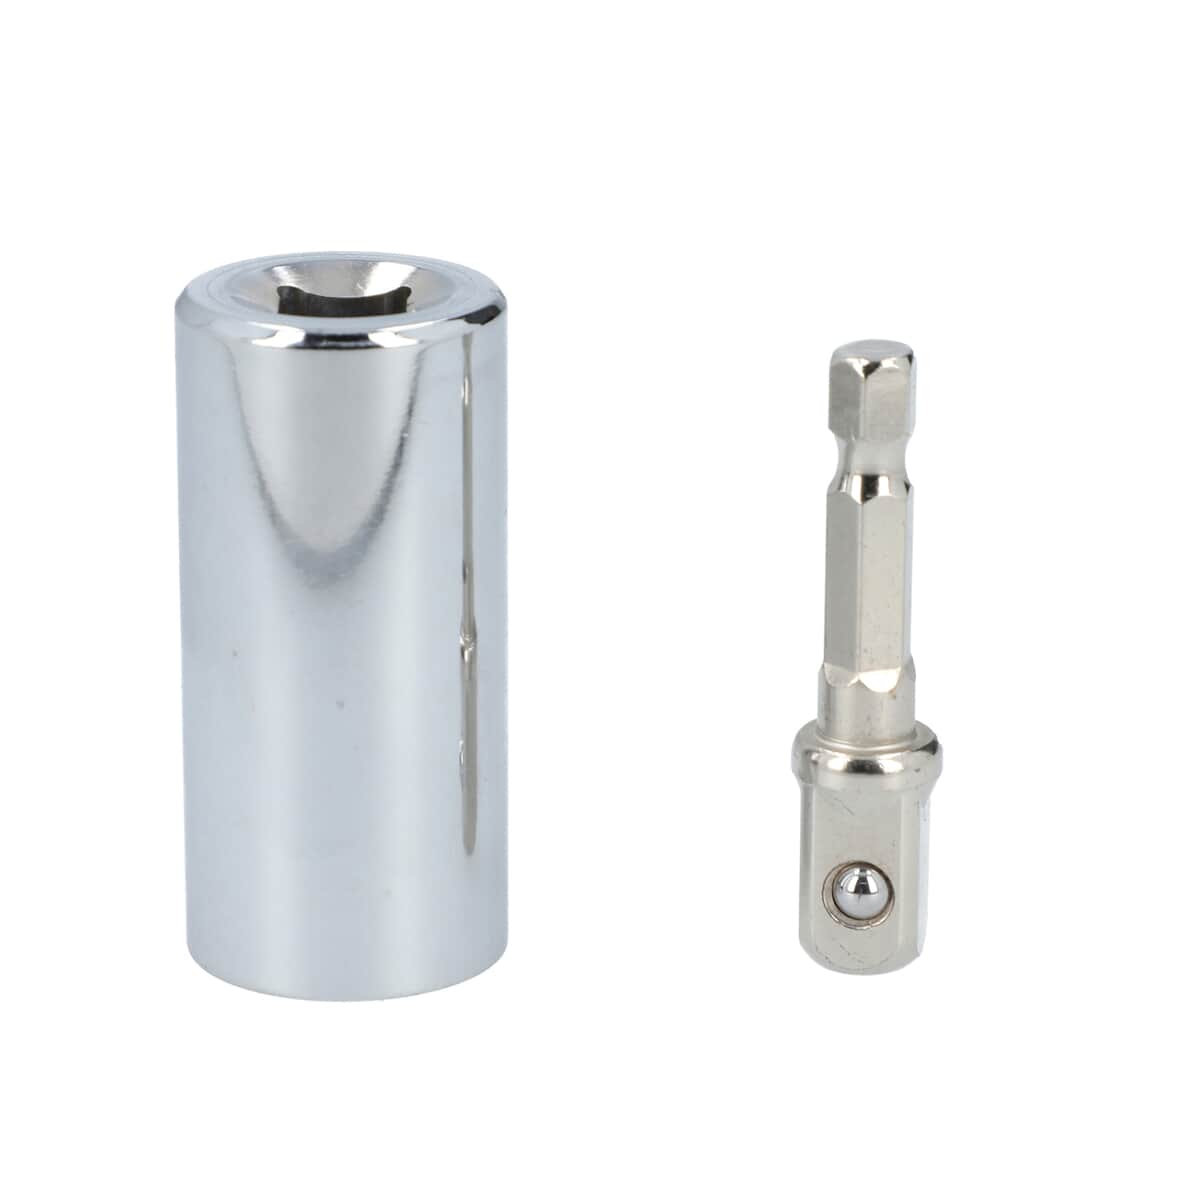 Set of Universal Socket and Drill Adapter in Stainless Steel - Silver Color image number 0